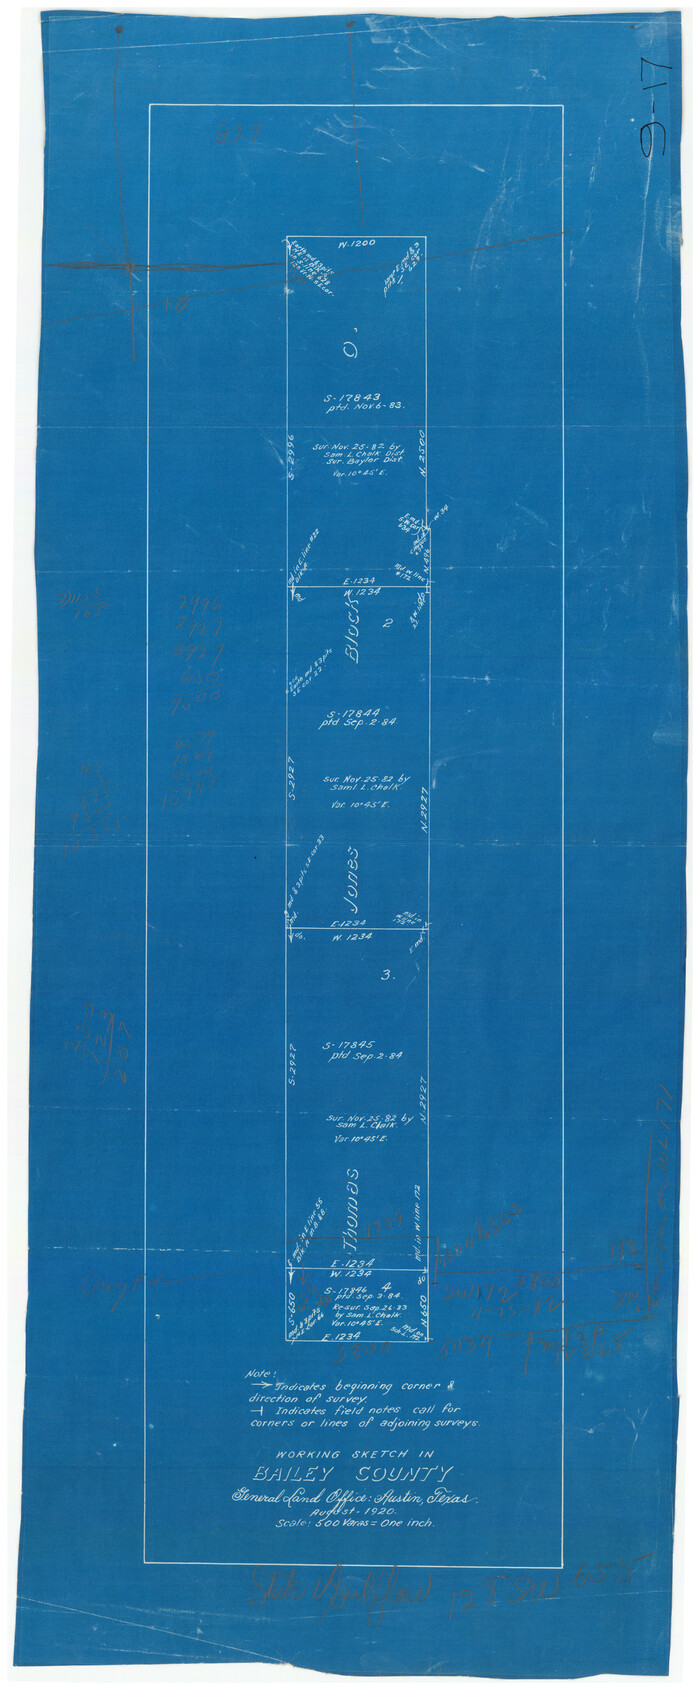 90255, Working Sketch in Bailey County, Twichell Survey Records